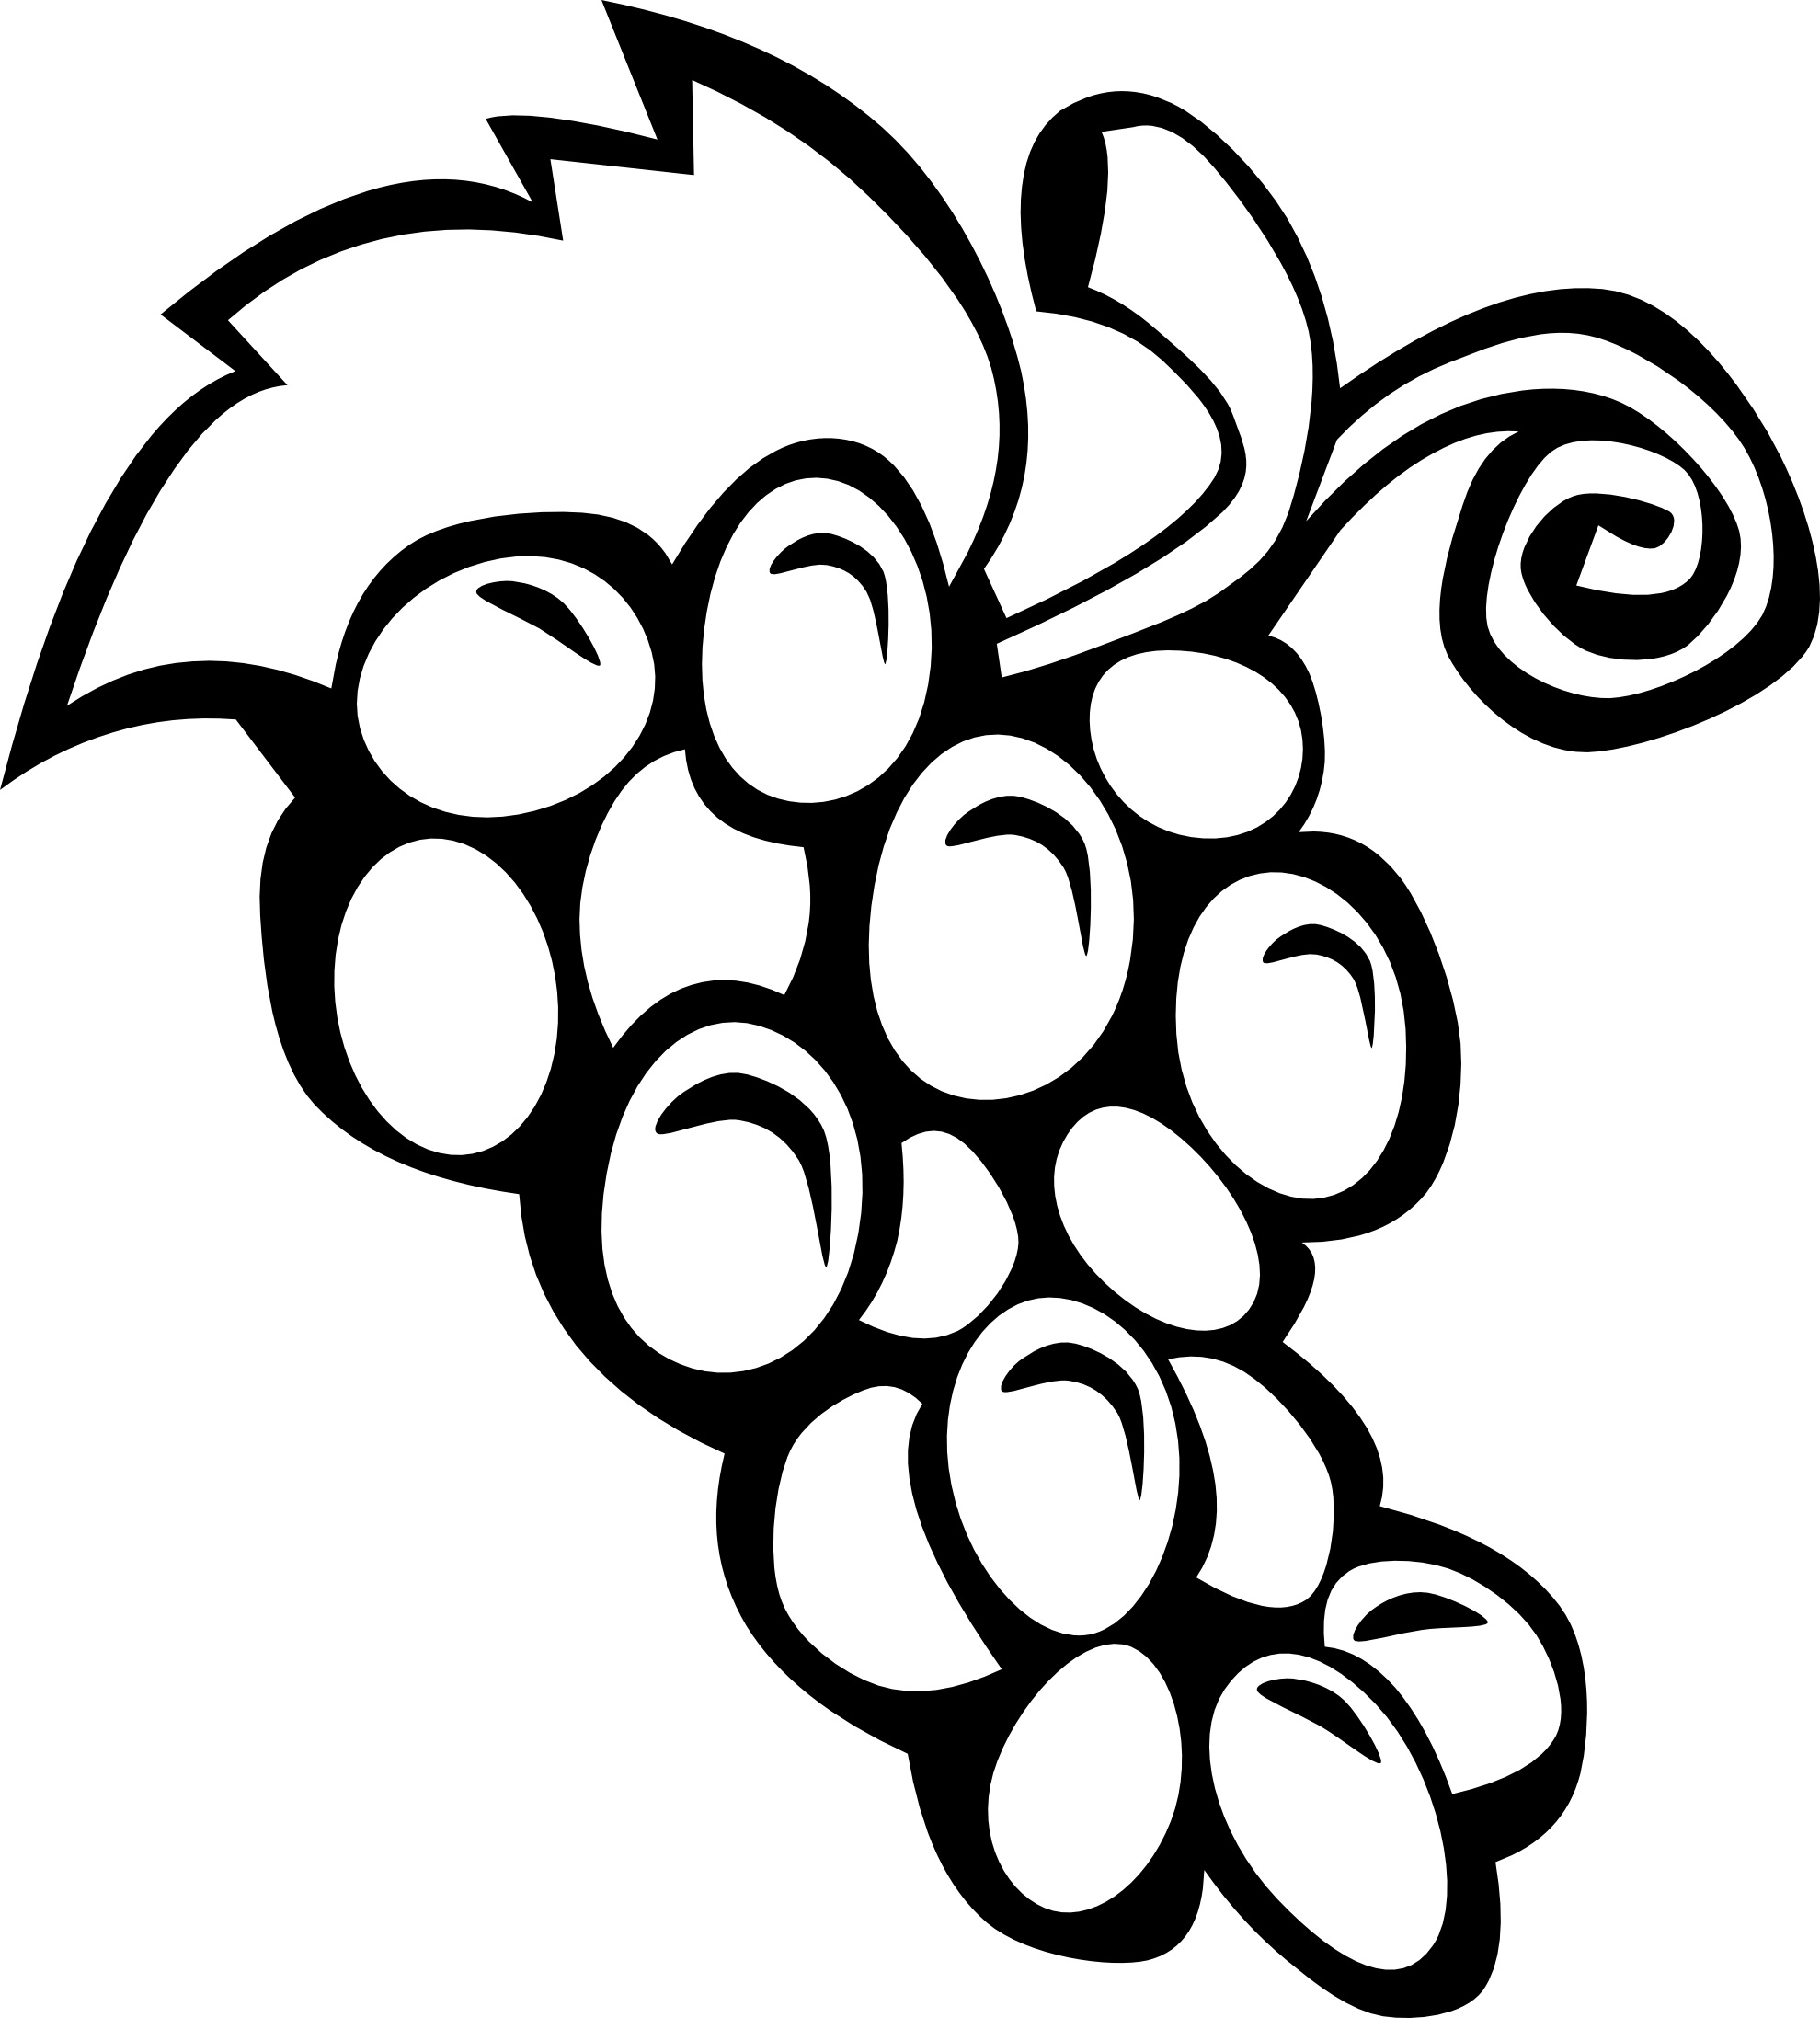 Fruit Clipart Black And White   Clipart Panda   Free Clipart Images